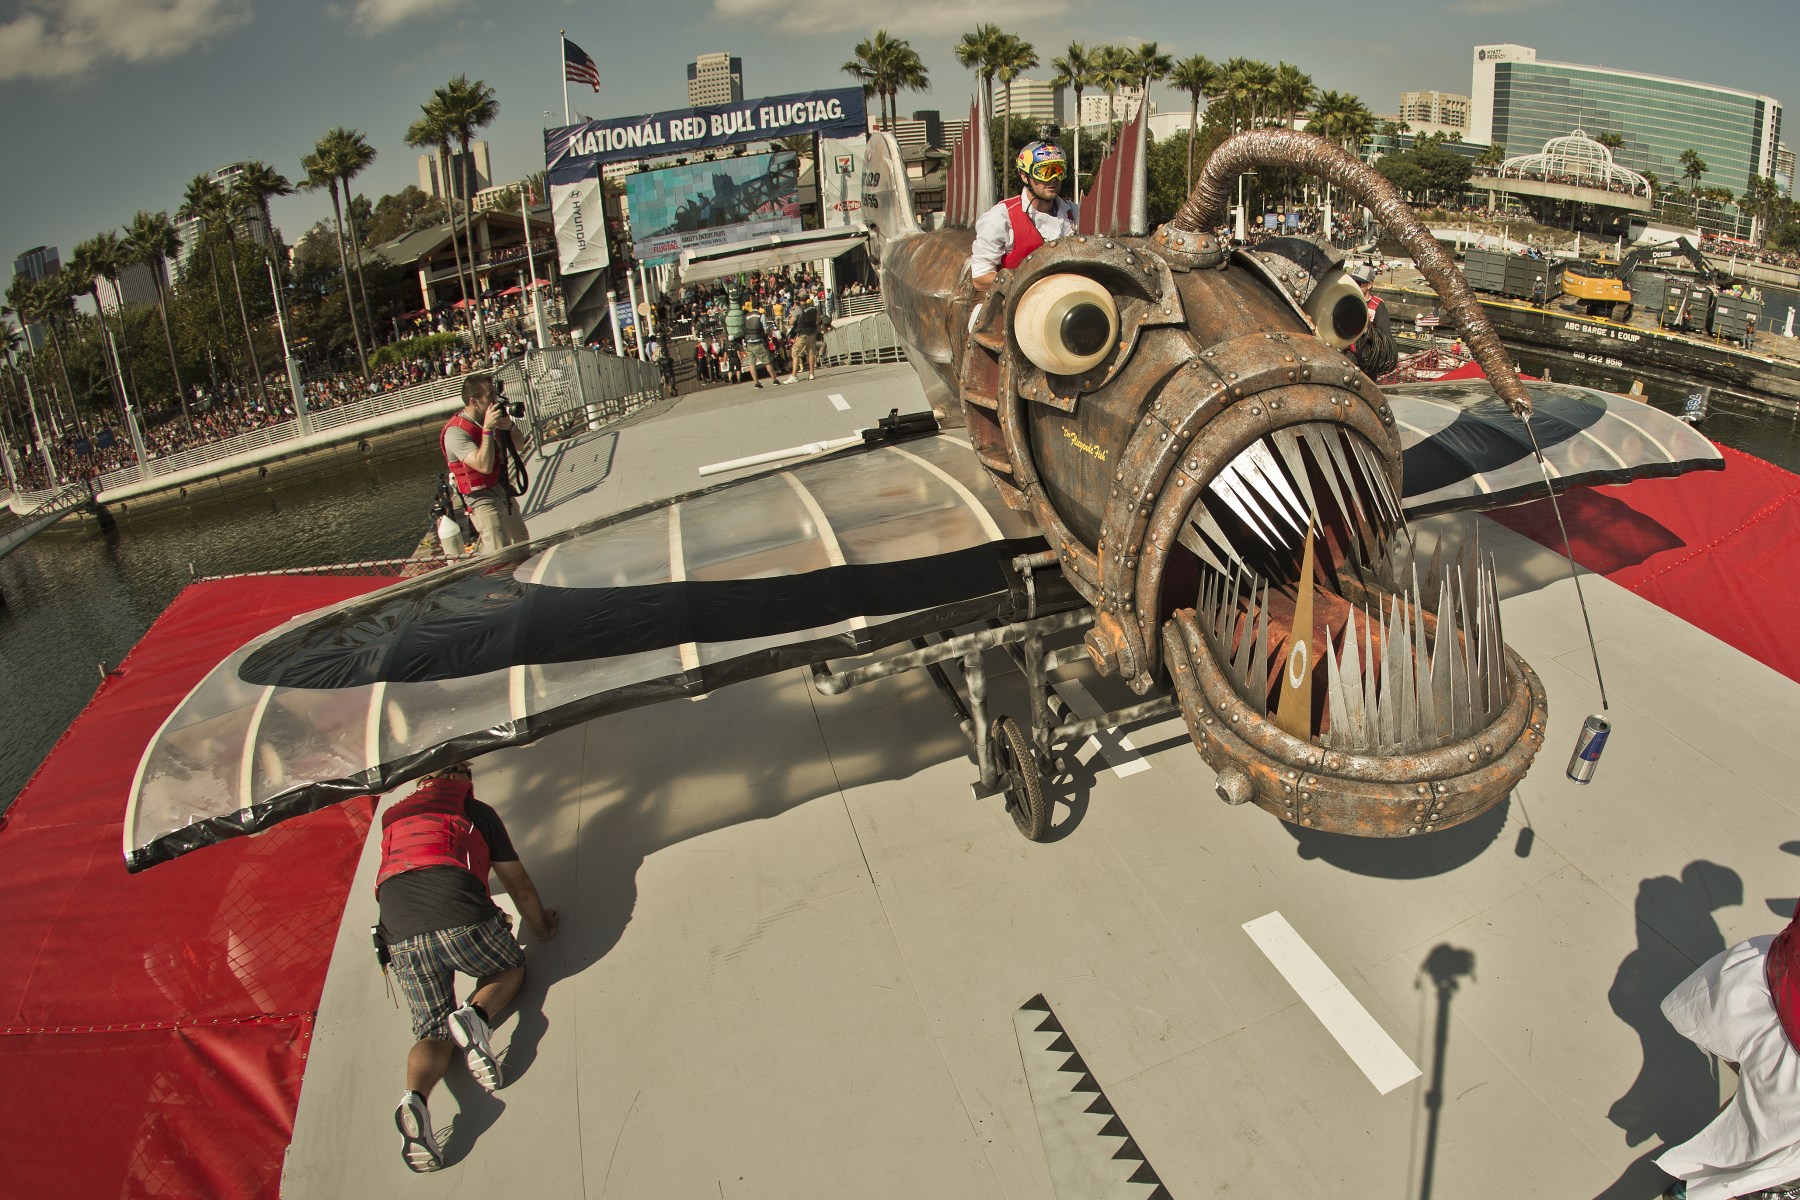 The Oakley Factory Pilots prepped for flight in an expertly assembled Anglerfish-inspired aircraft at the Long Beach Flugtag Race.